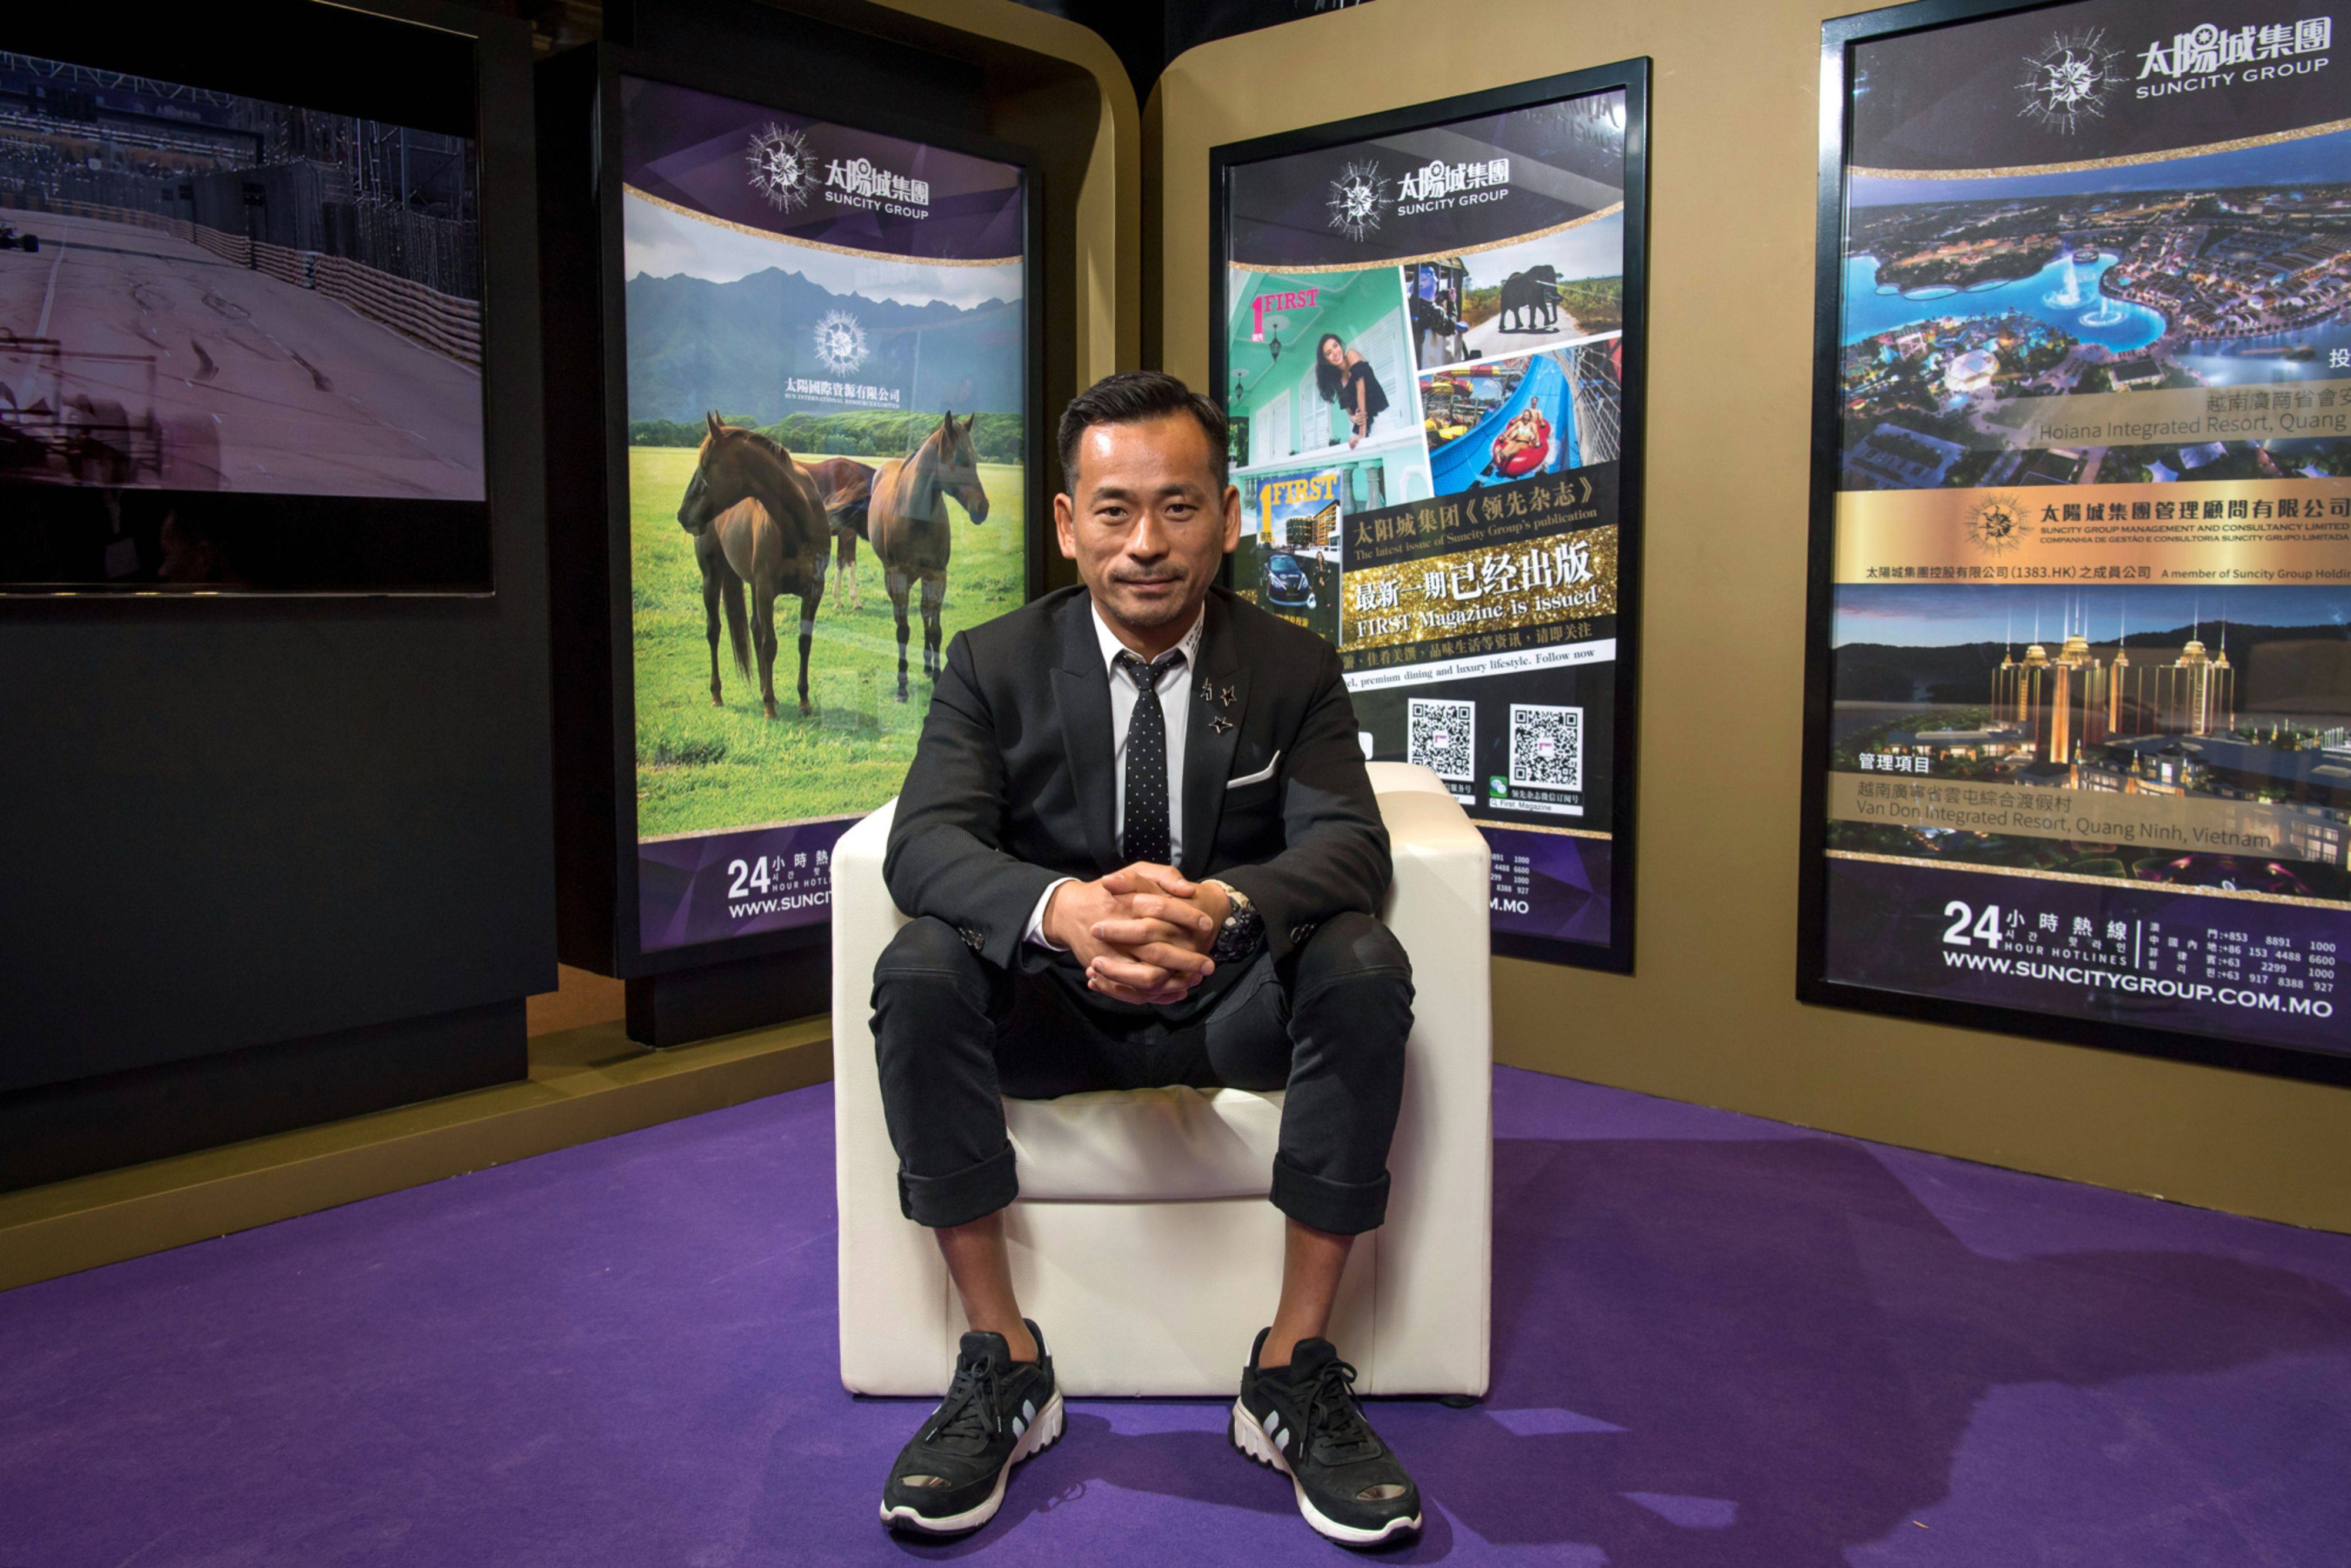 Alvin Chau, the founder and chairman of Suncity Group Holdings, has been jailed for 18 years on 162 charges of fraud, illegal gambling and criminal association. Photo: Bloomberg